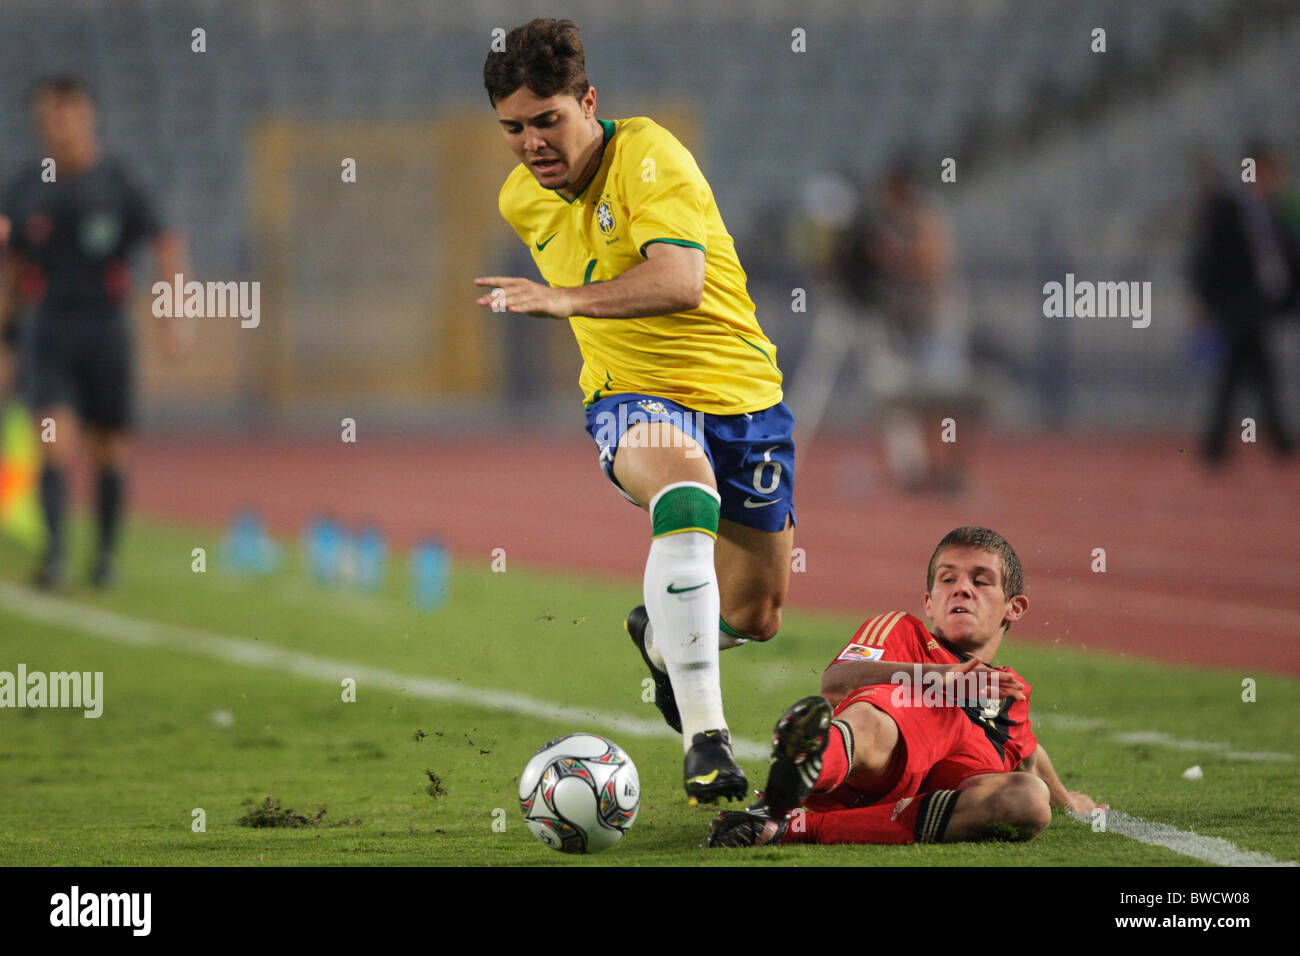 Diogo of Brazil (l) avoids a tackle by Sebastian Jung of Germany (r) during a 2009 FIFA U-20 World Cup quarterfinal match Stock Photo